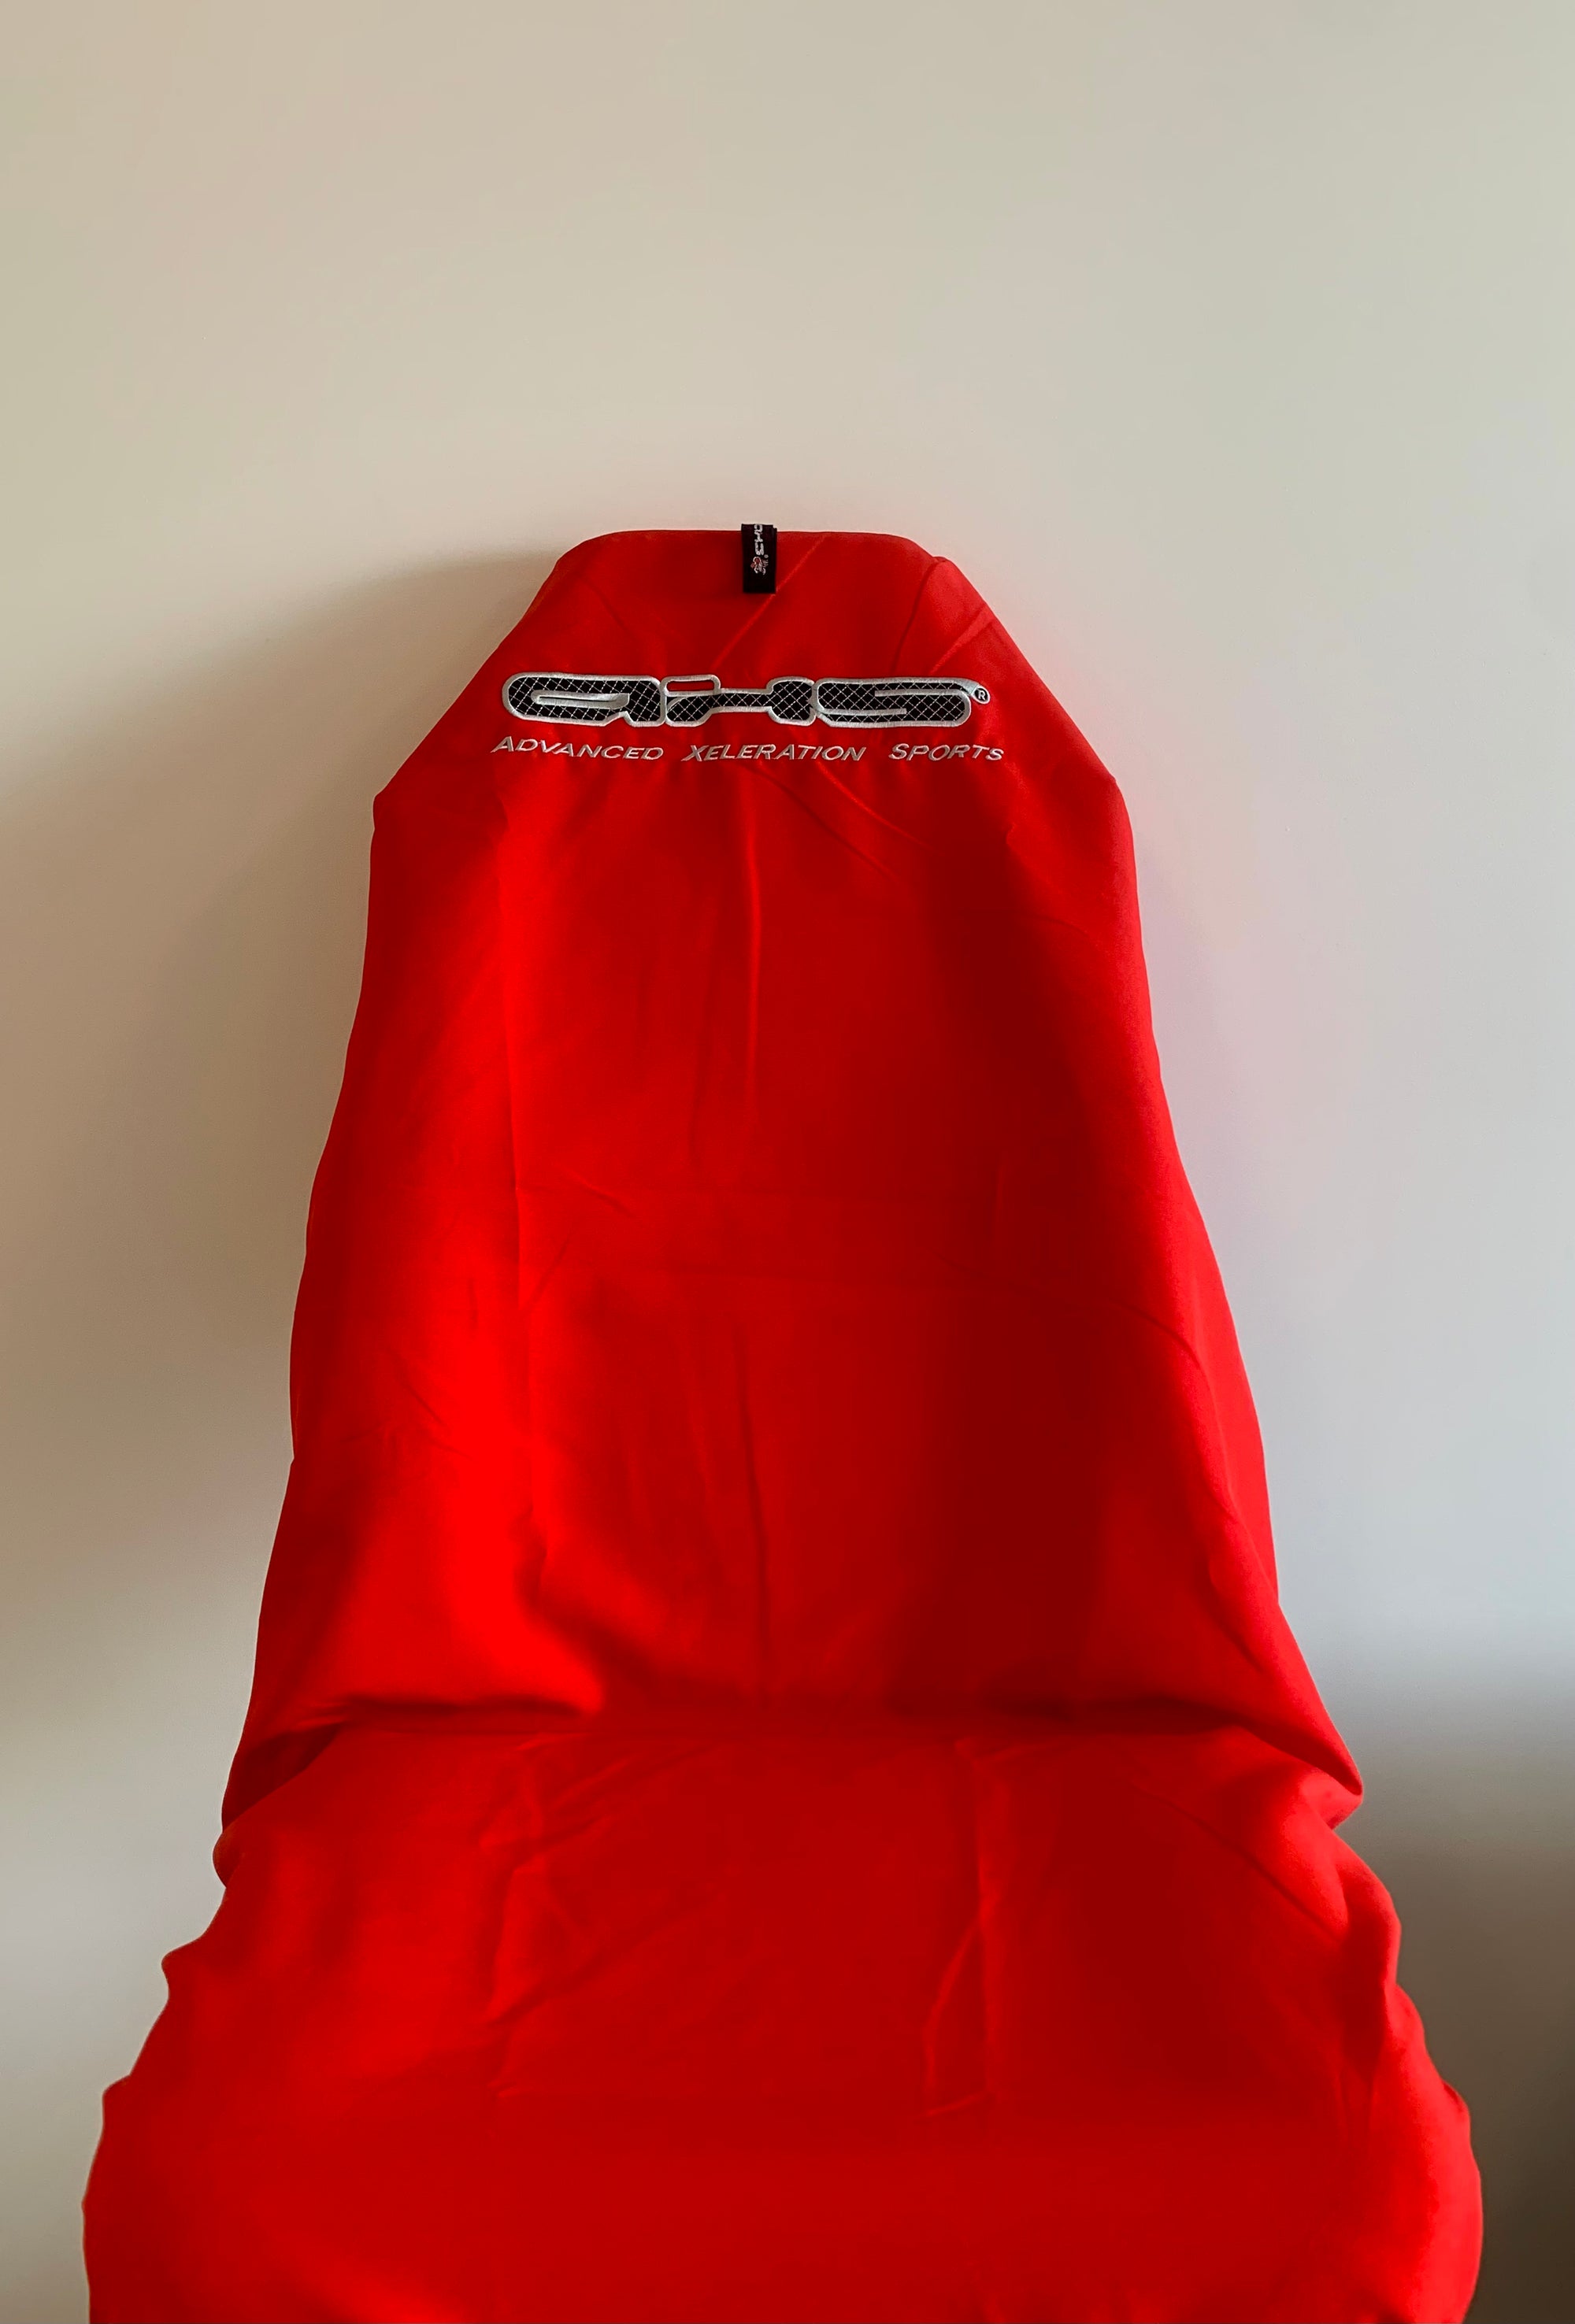 Pair Hot Red - AXS Aussie made & owned throw over - slip on seat covers Suit Holden Commodore inc Wider HSV Seats